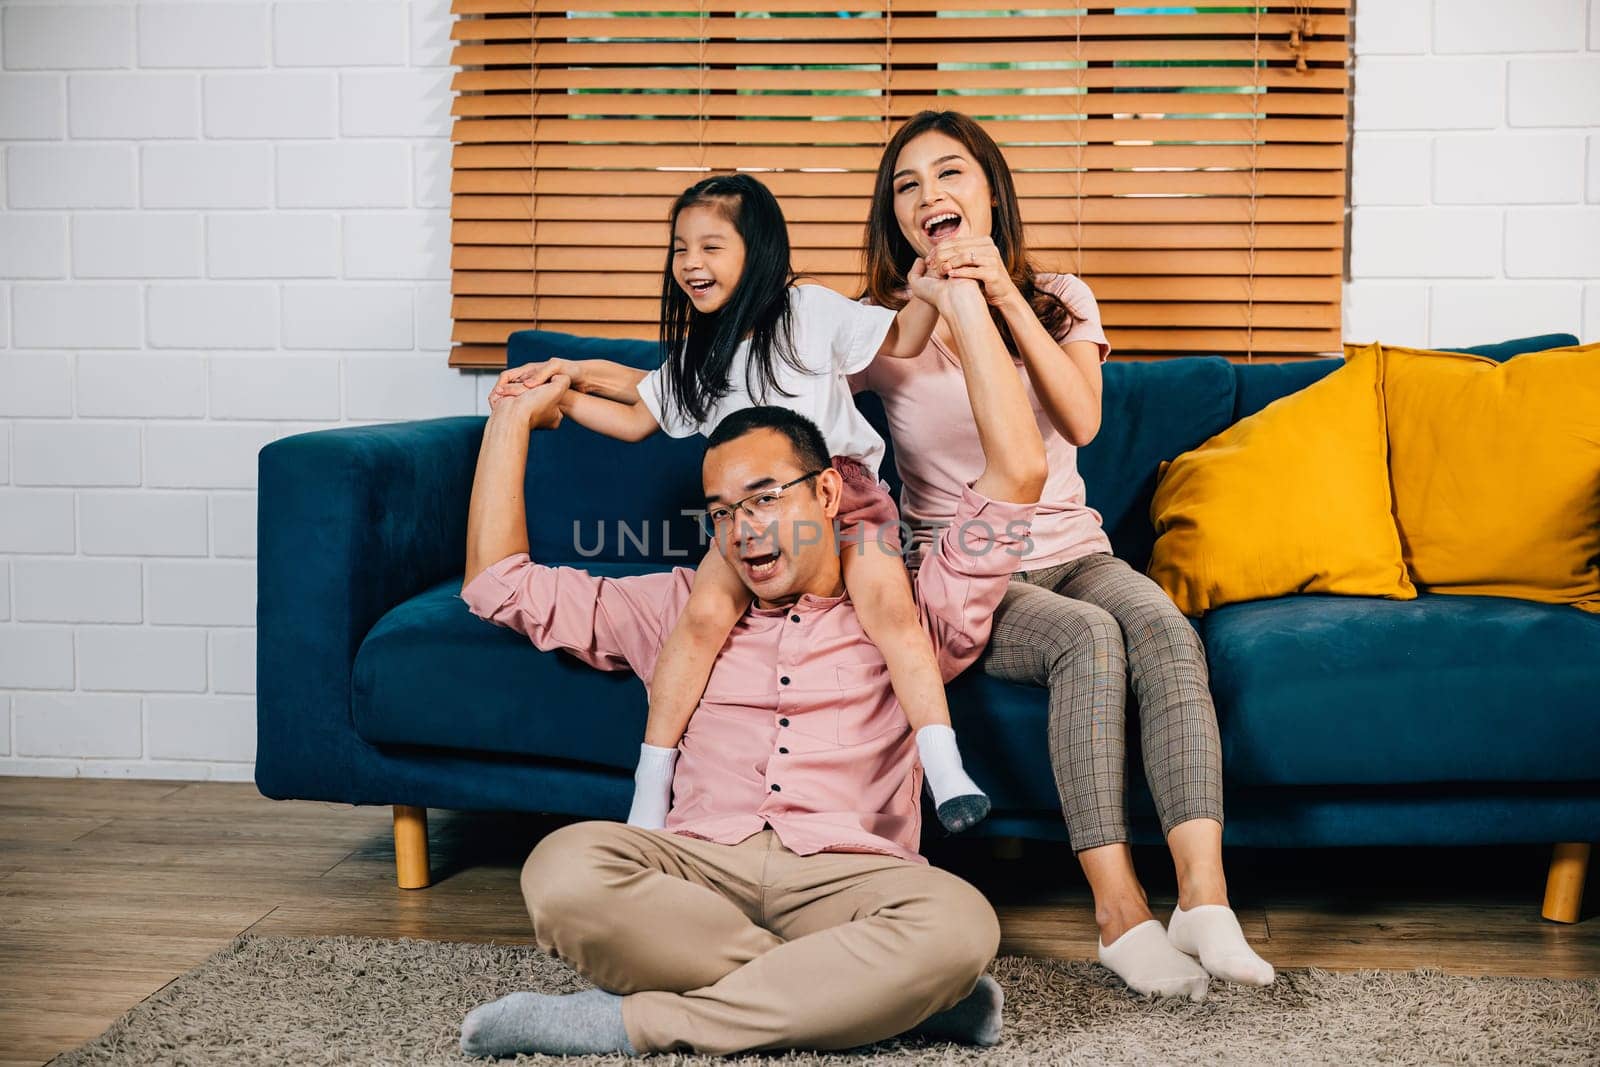 A cheerful Asian family father mother and daughter find happiness in togetherness on a comfortable sofa in their modern home. Playful and affectionate they embrace the joys of self-isolation.